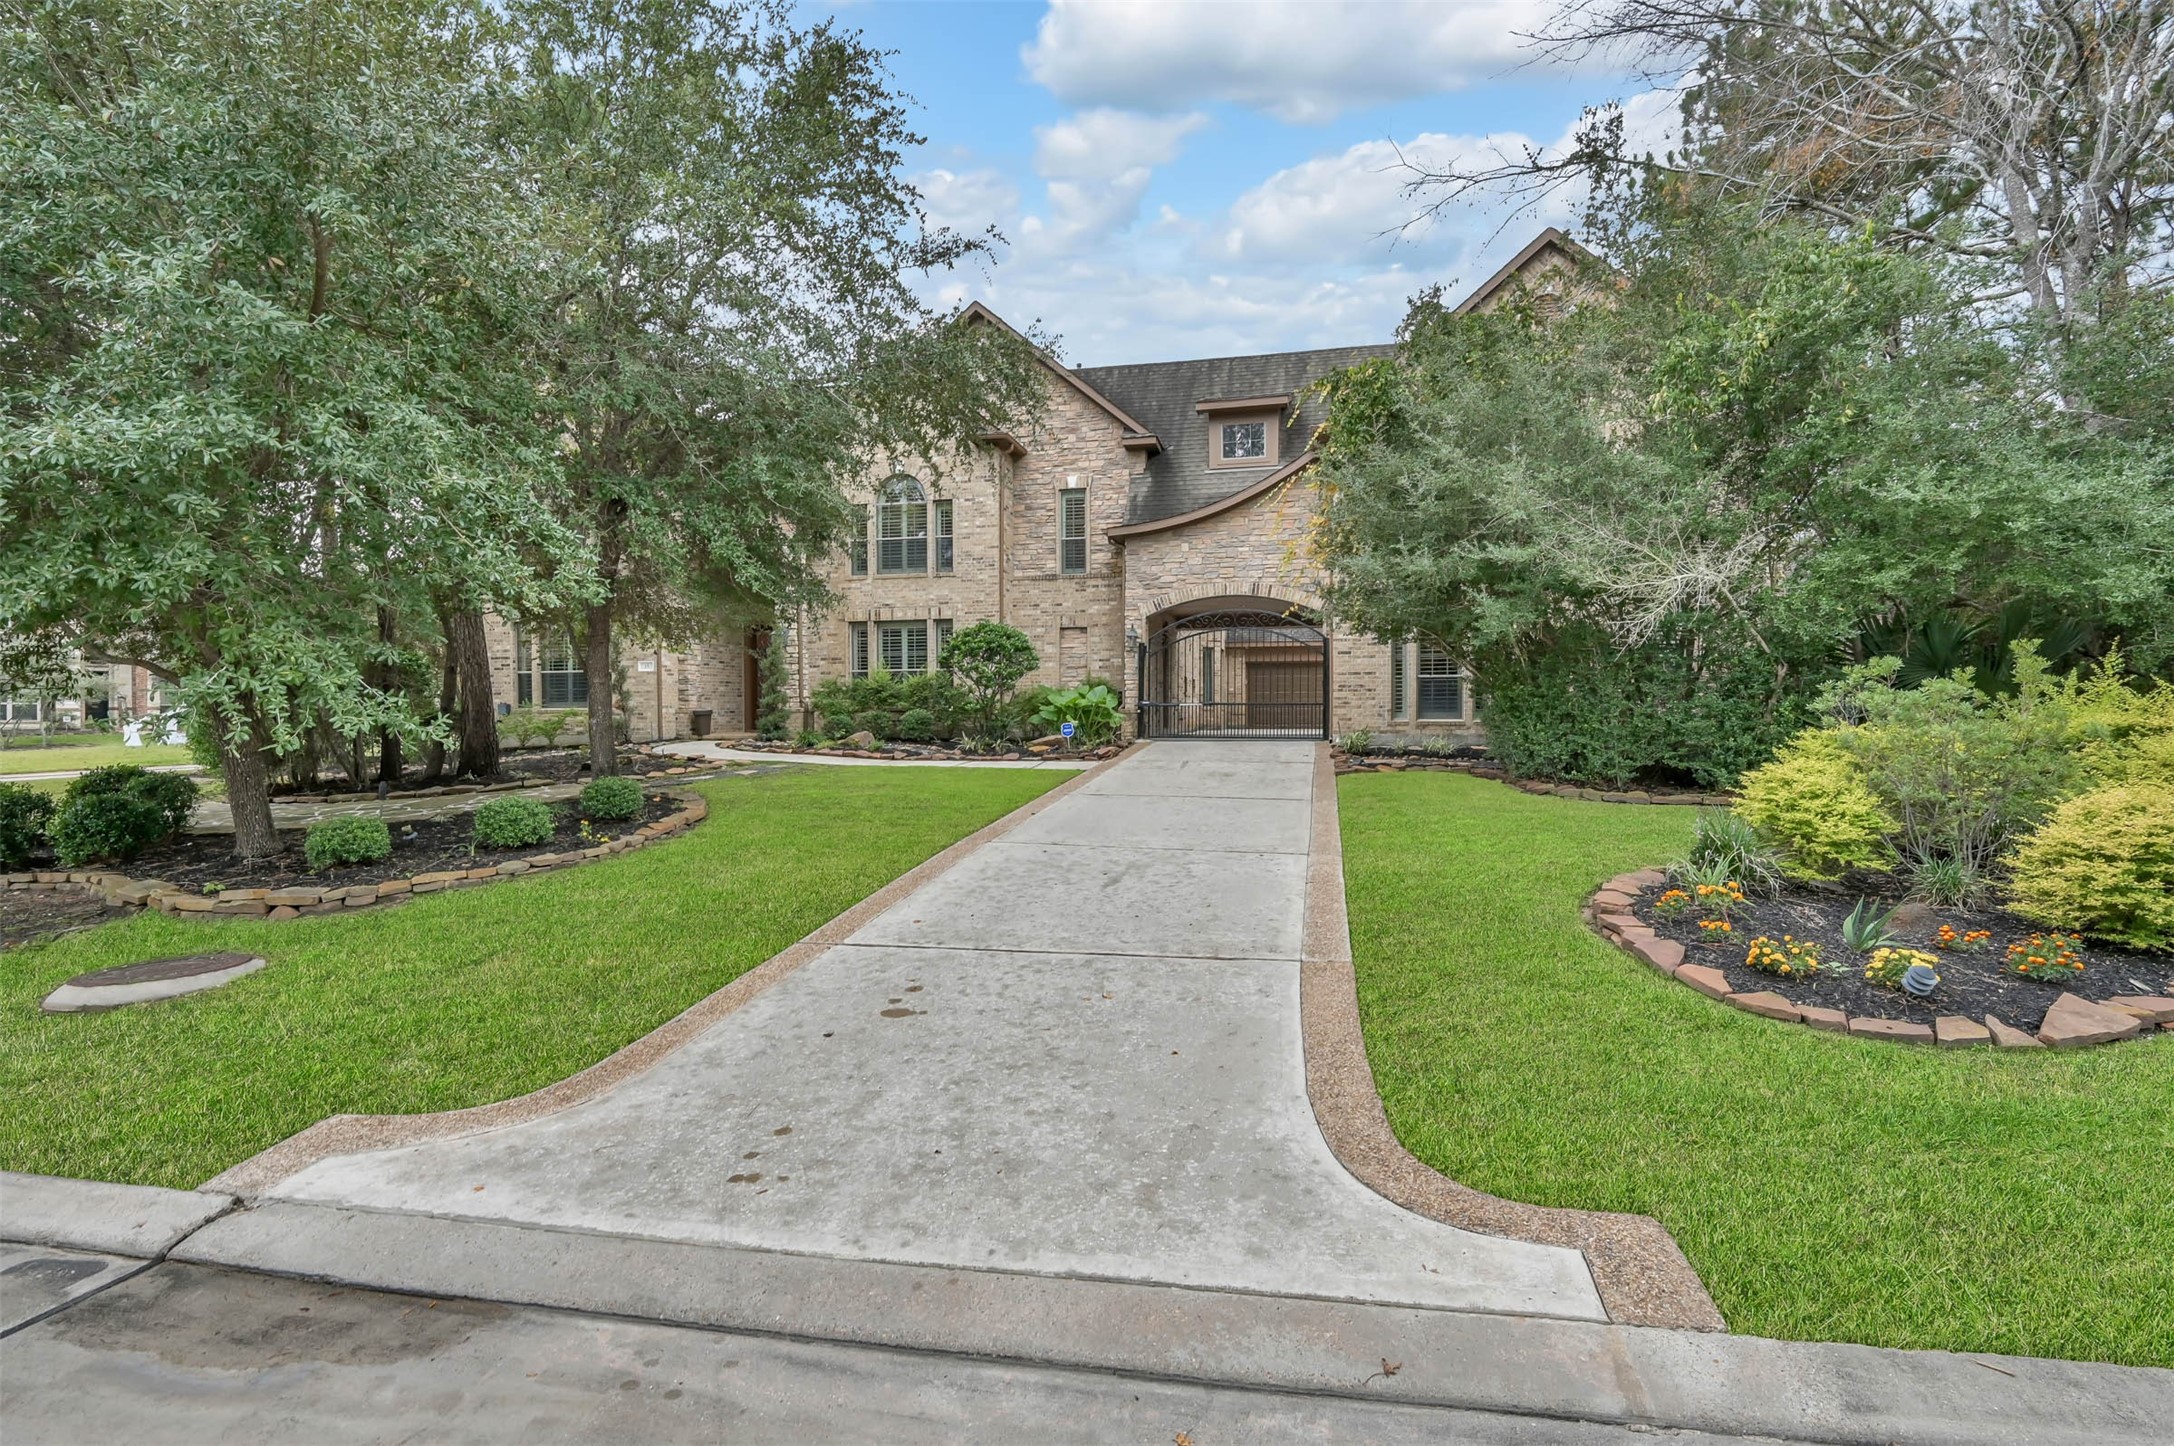 Welcome to 15 Veilwood Circle!  The driveway leads to a gated porte-cochère; a unique feature in the neighborhood. 